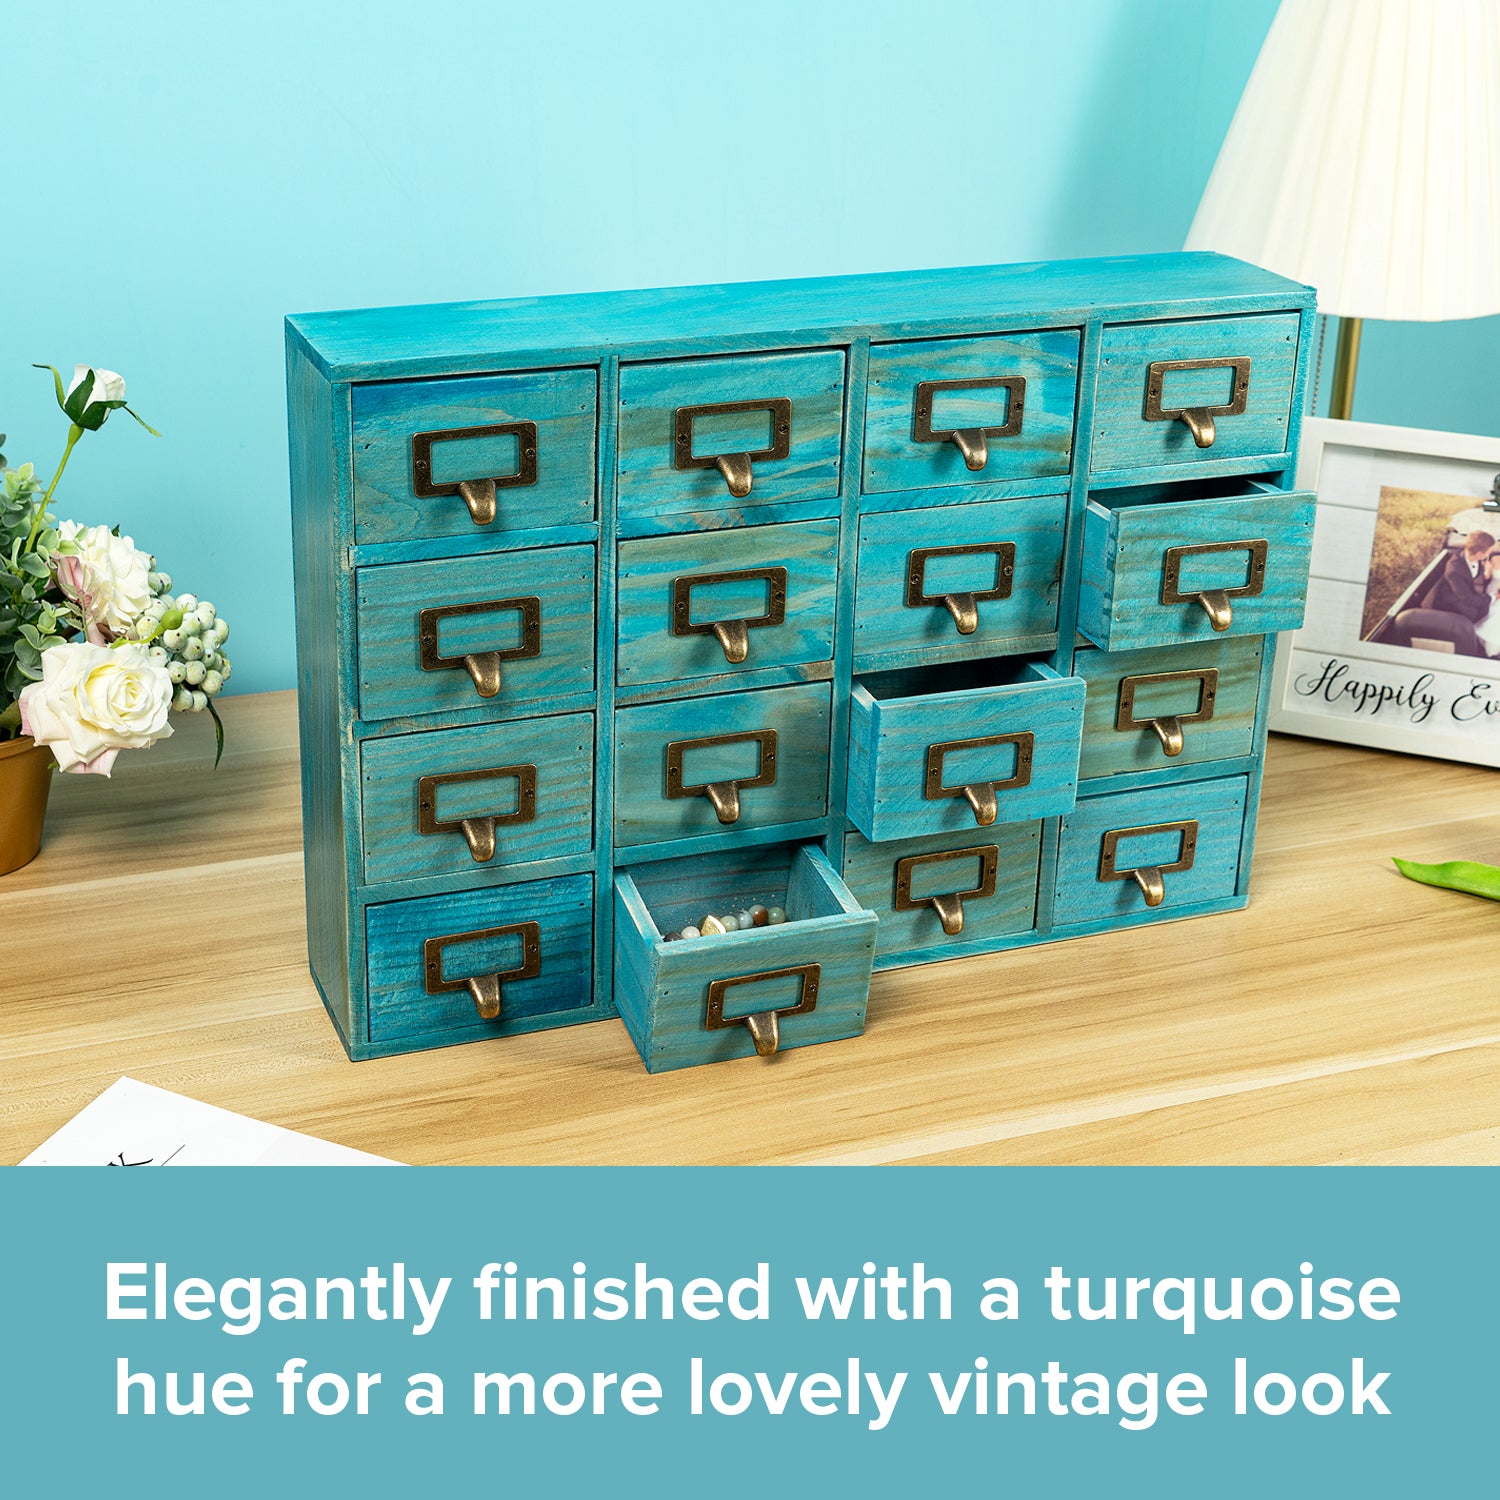 Load image into Gallery viewer, Teal Turquoise Vintage Wood 16 Mini Card Catalog Drawers Apothecary Cabinet I Organize Your Desktop